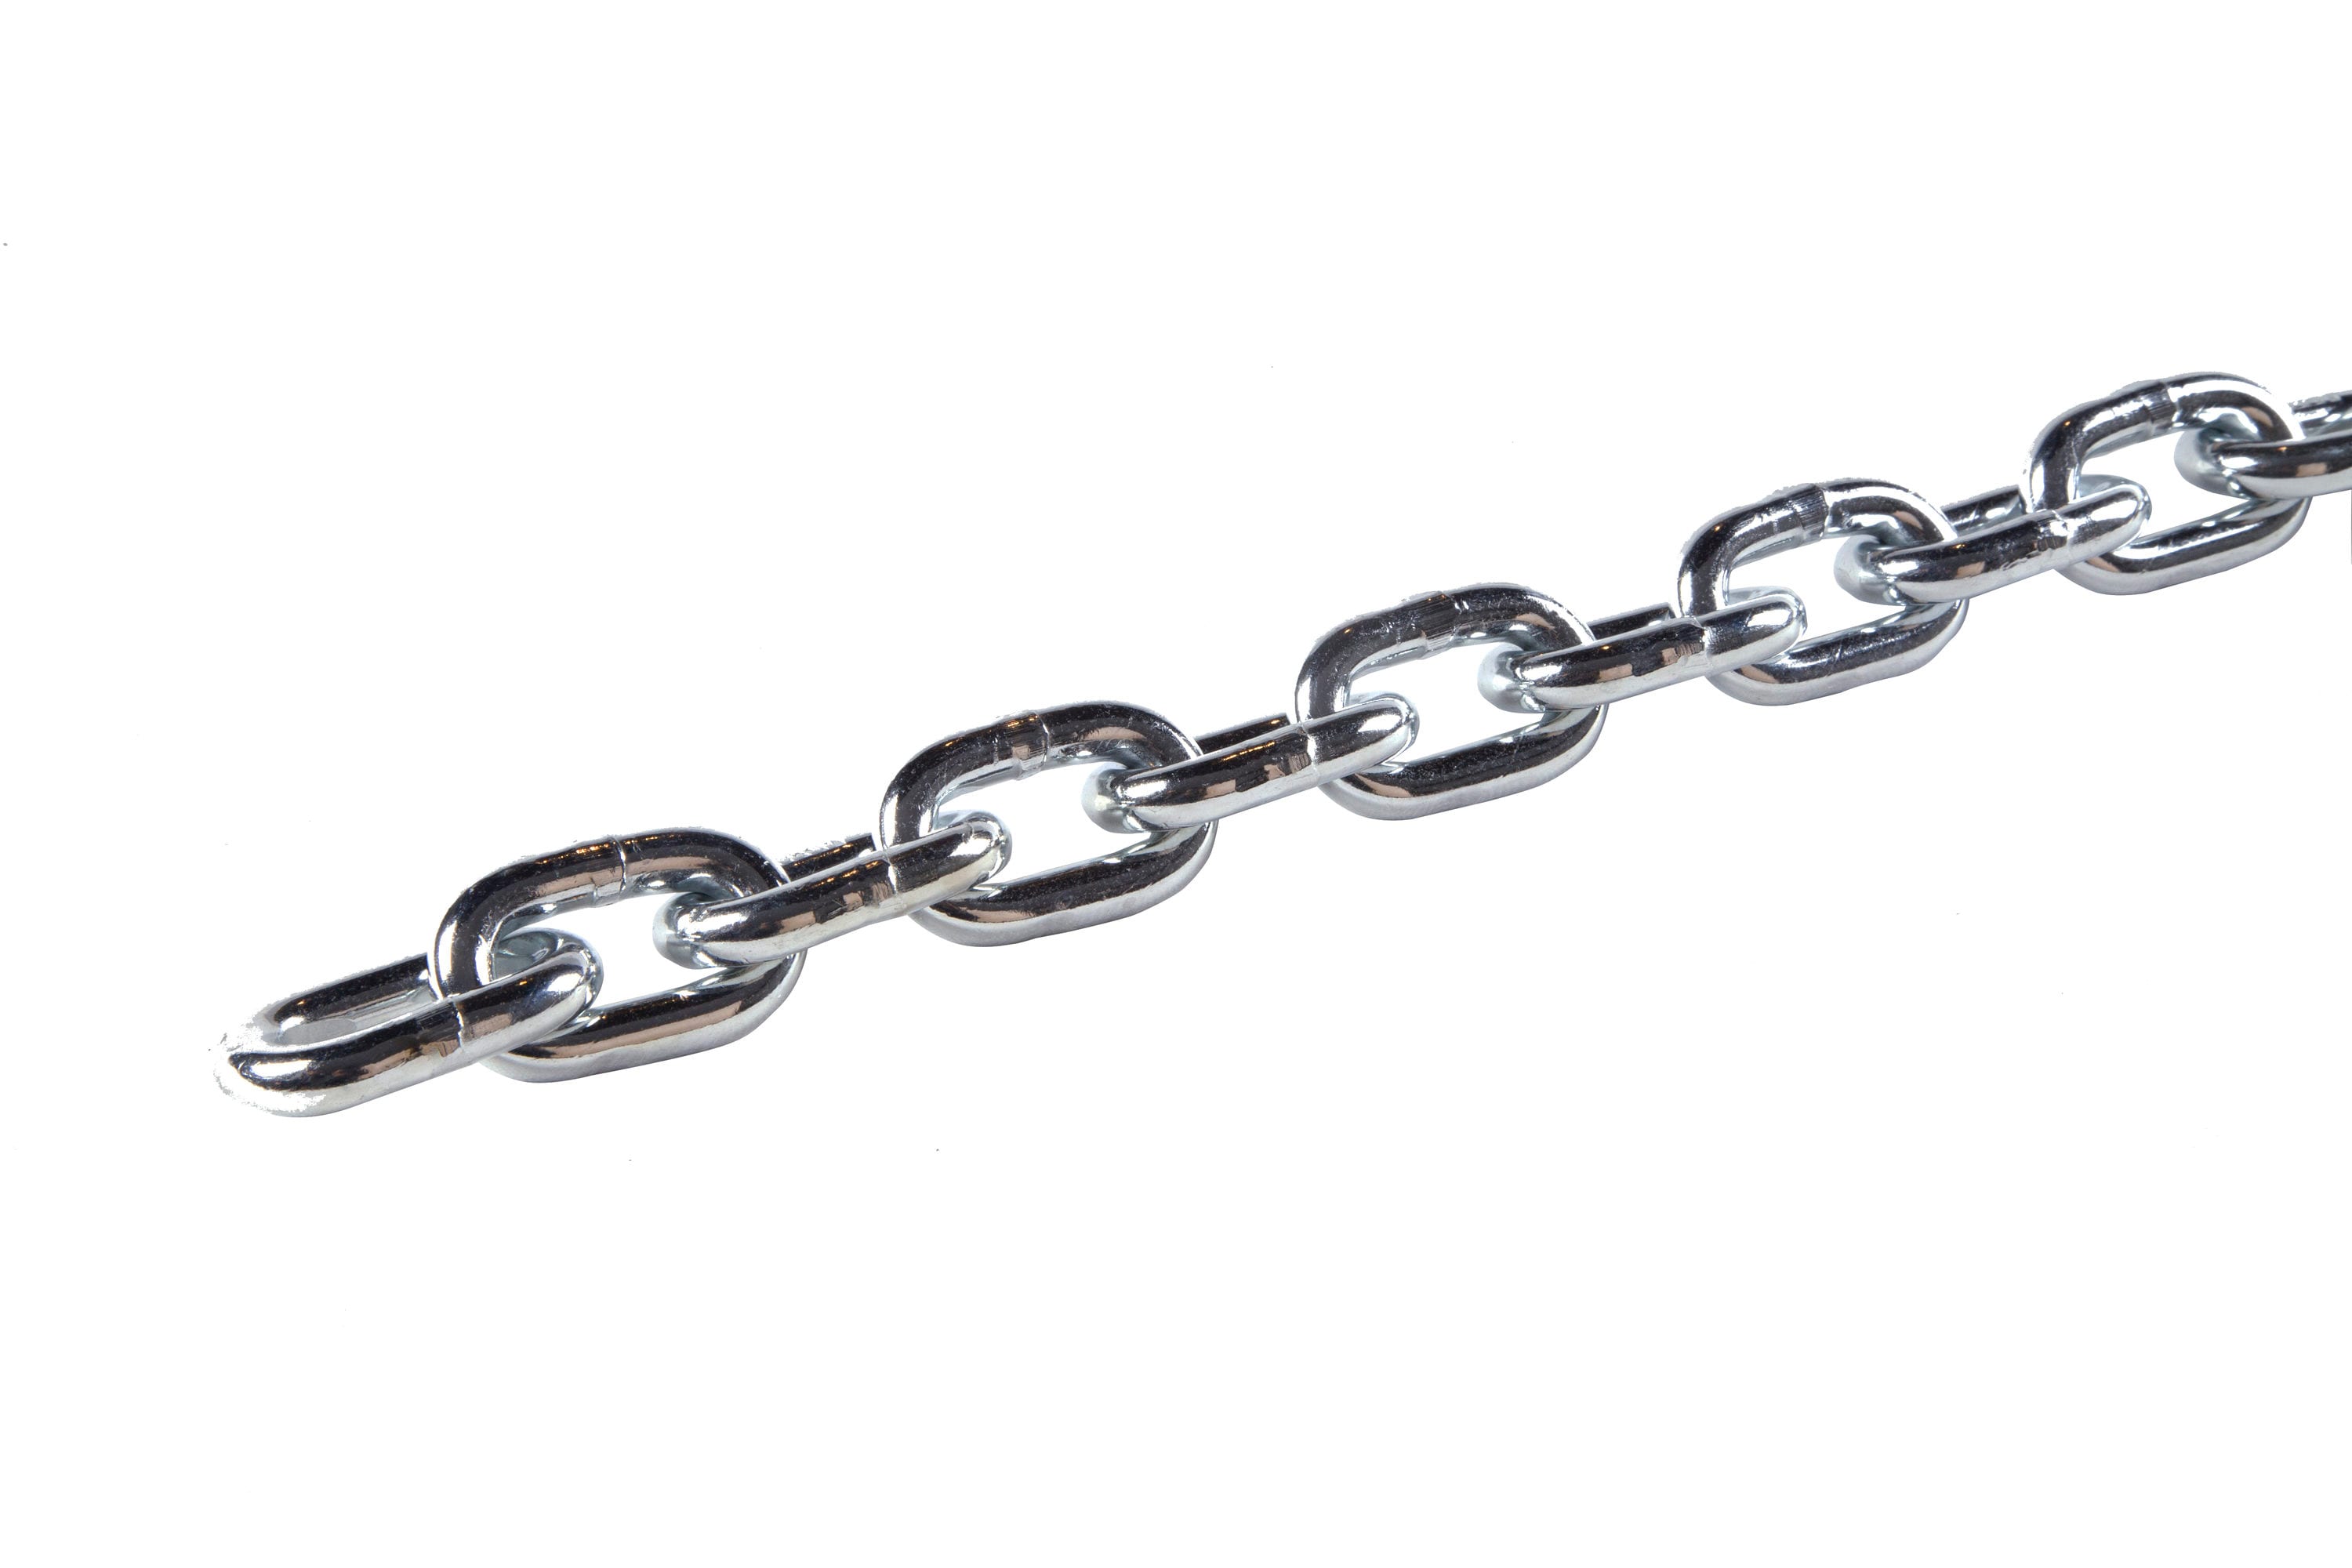 Number 3 Trade Size Stainless Steel Ball Chain